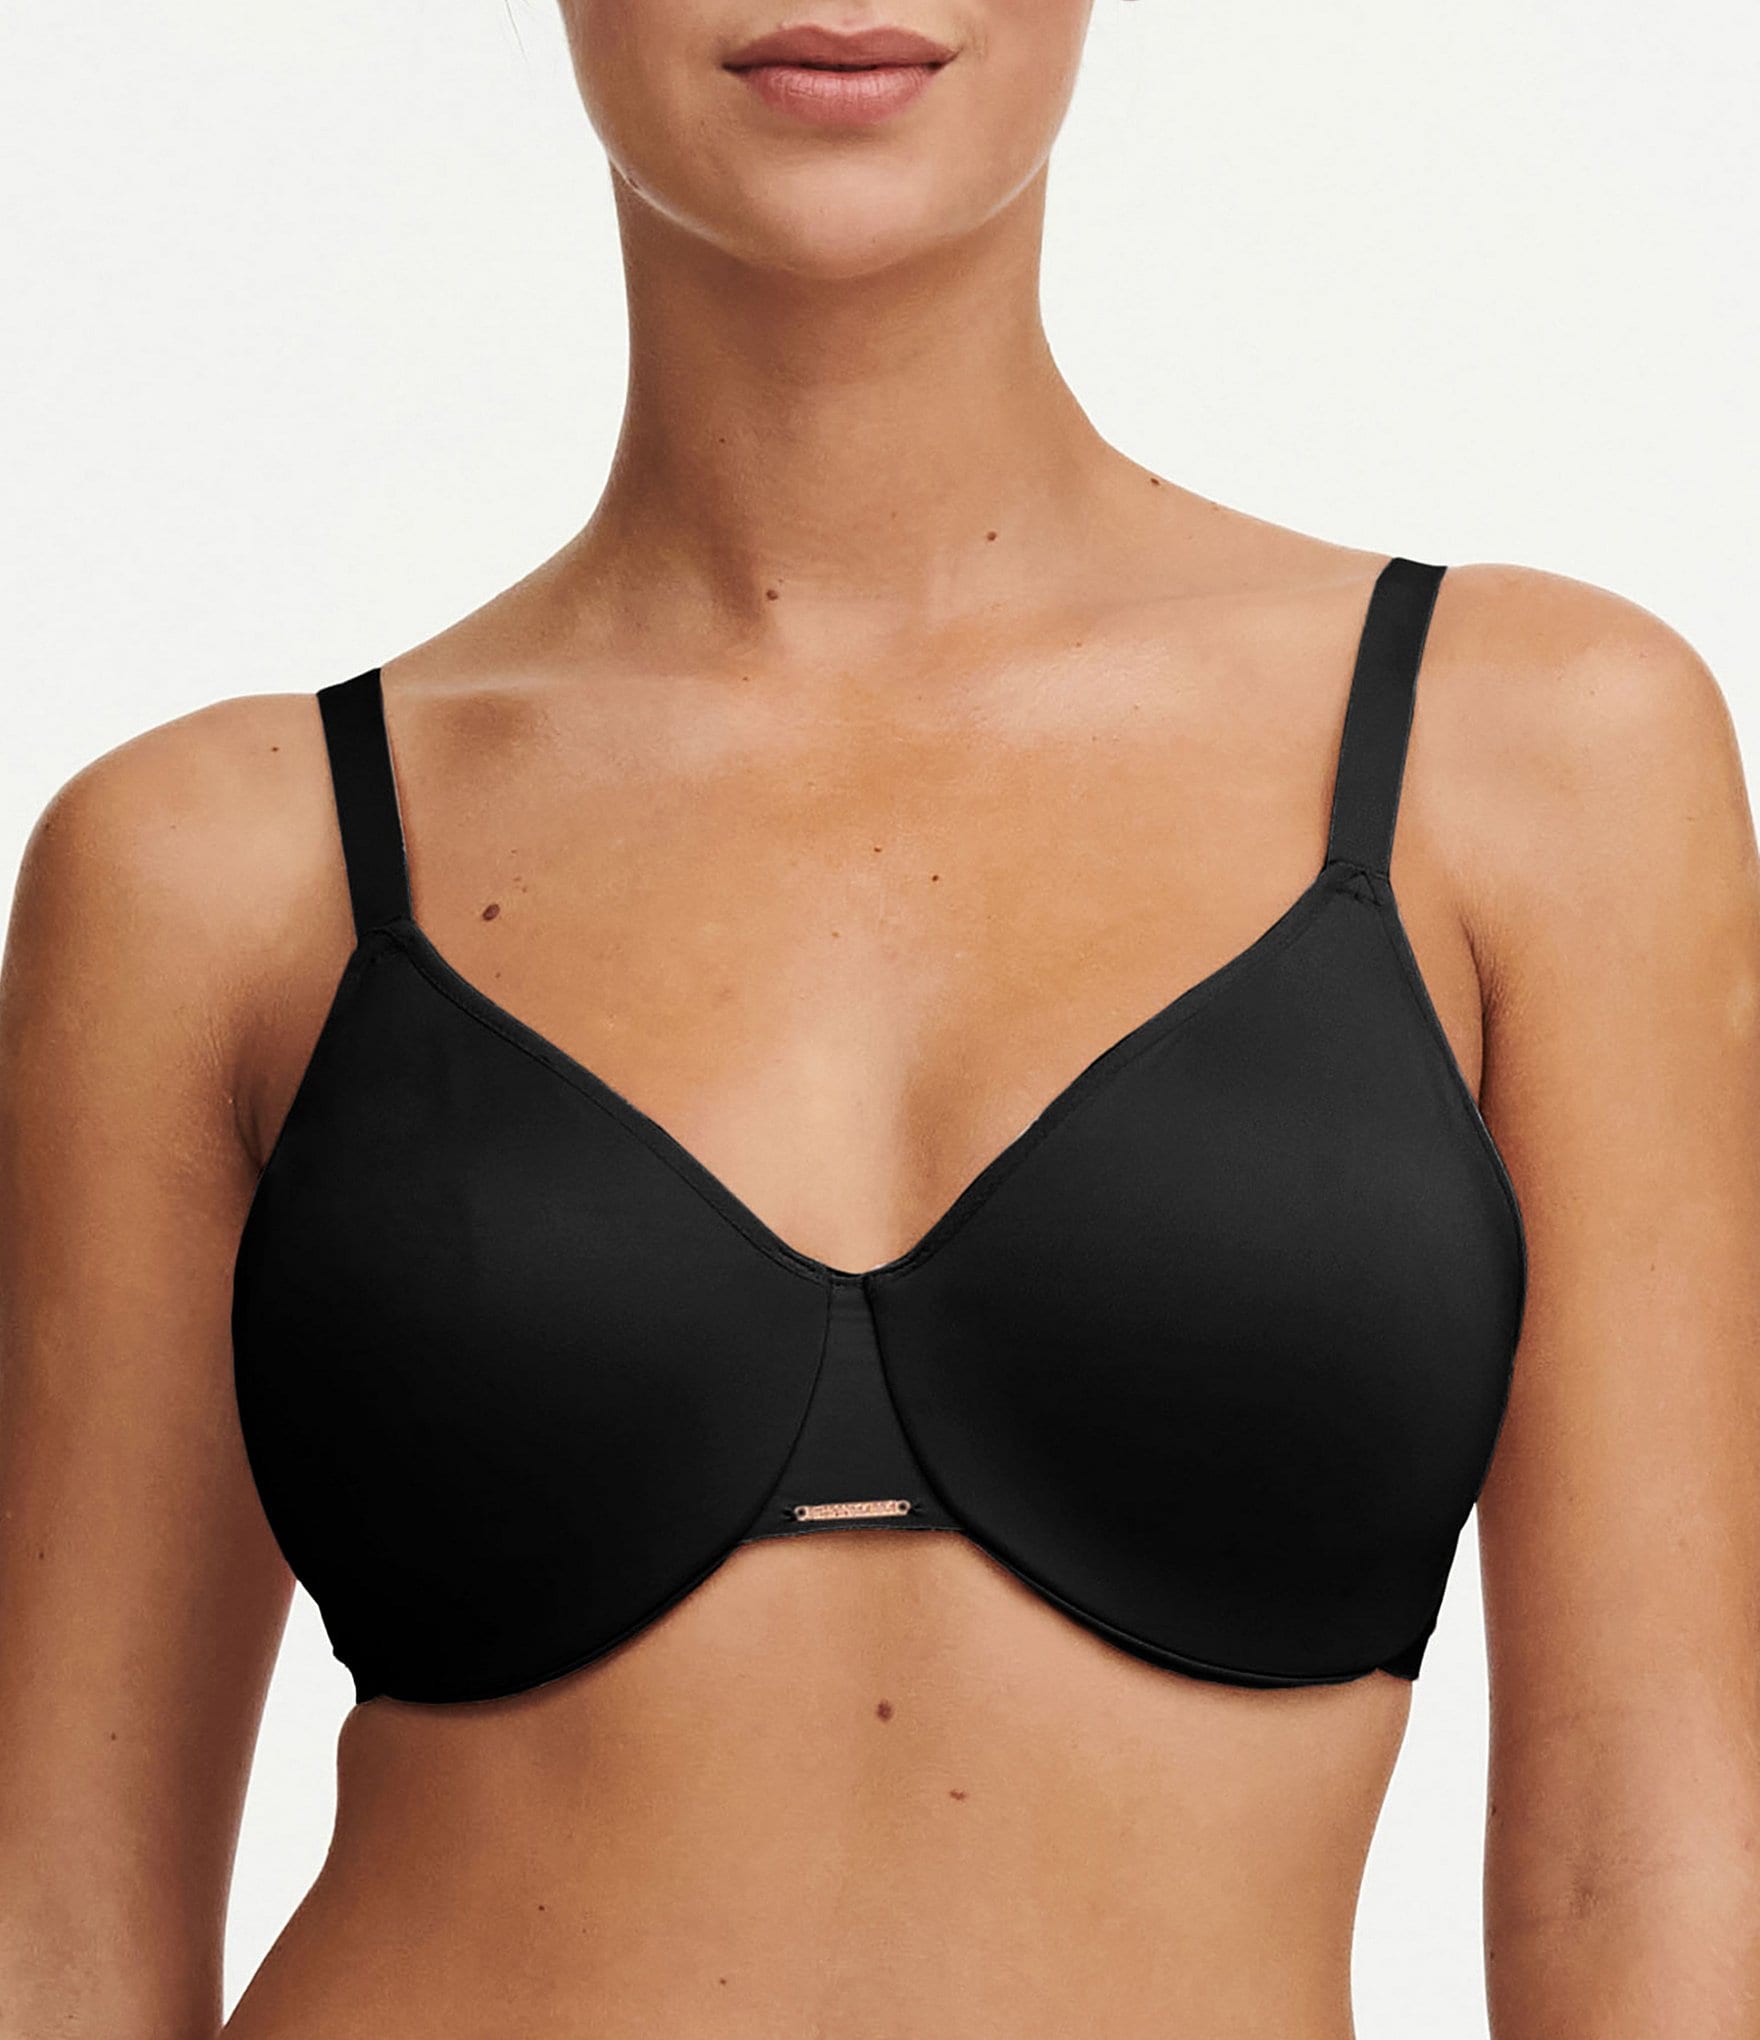 Intimate Touch - Olga bras now $99 at Intimate Touch